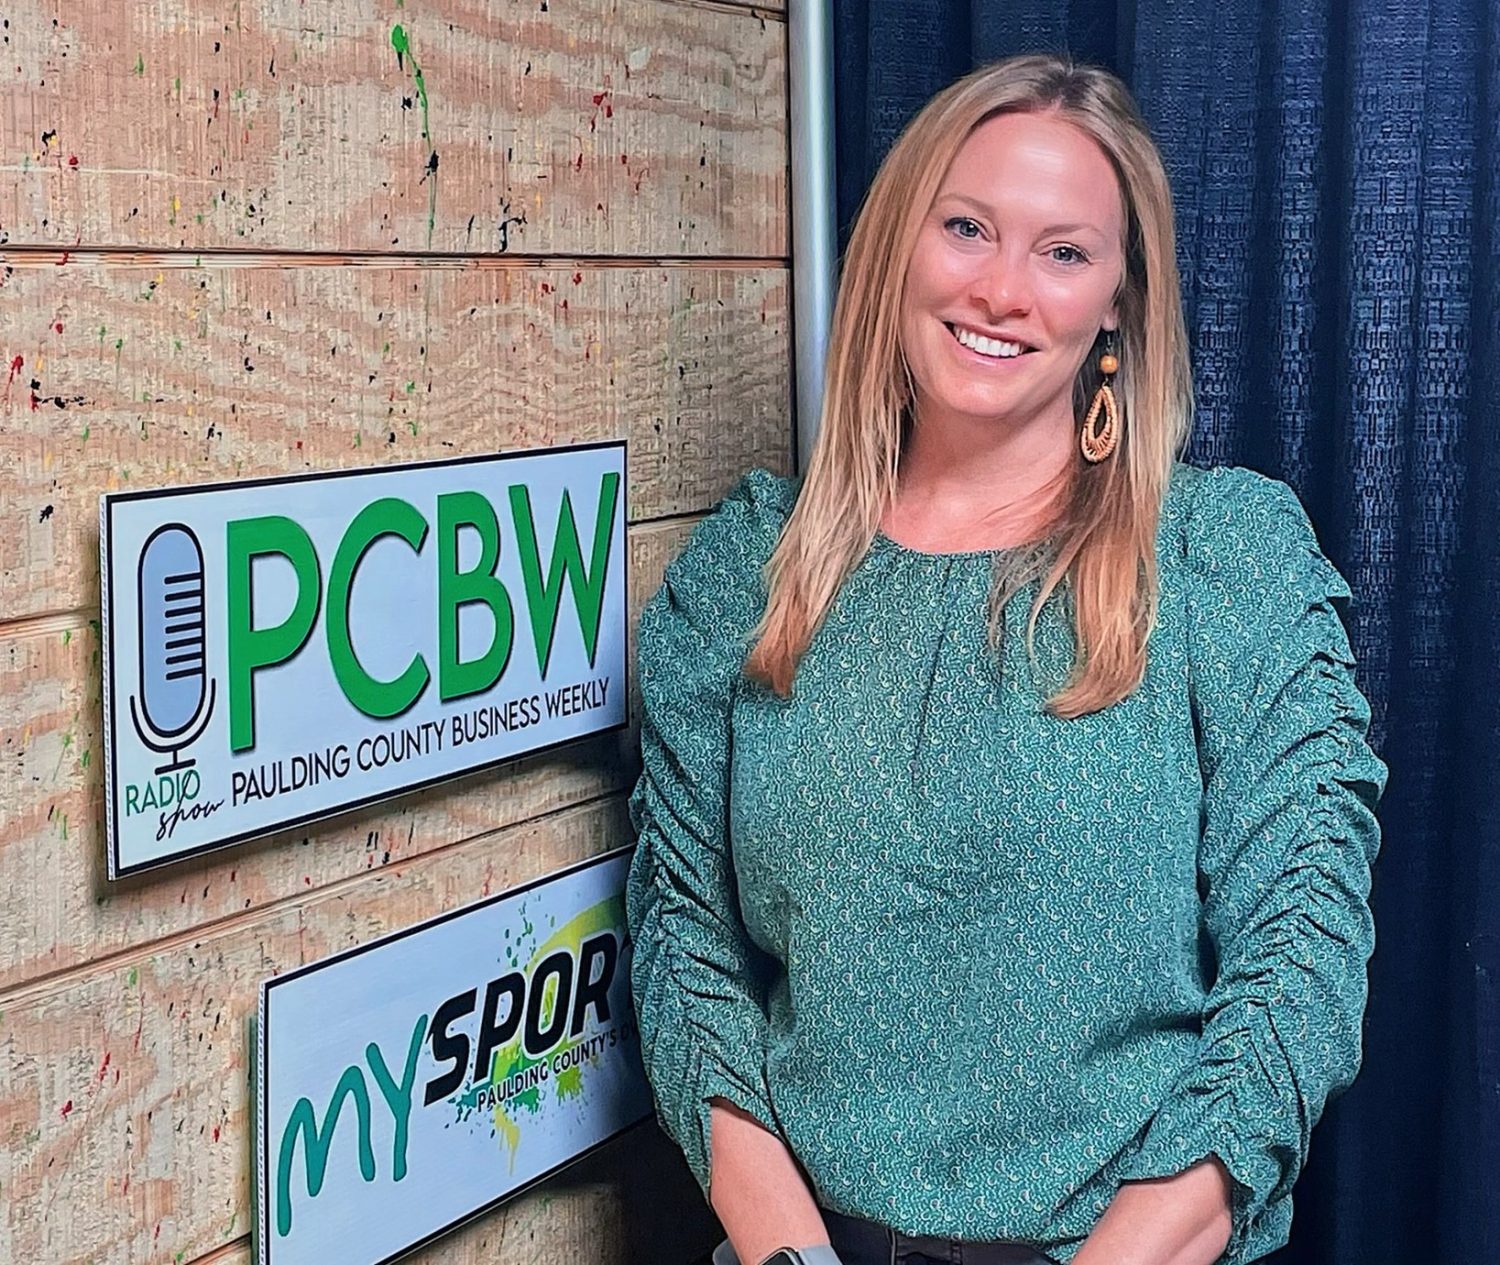 Next guest on Paulding County Business Weekly: Natural Design & Graphics